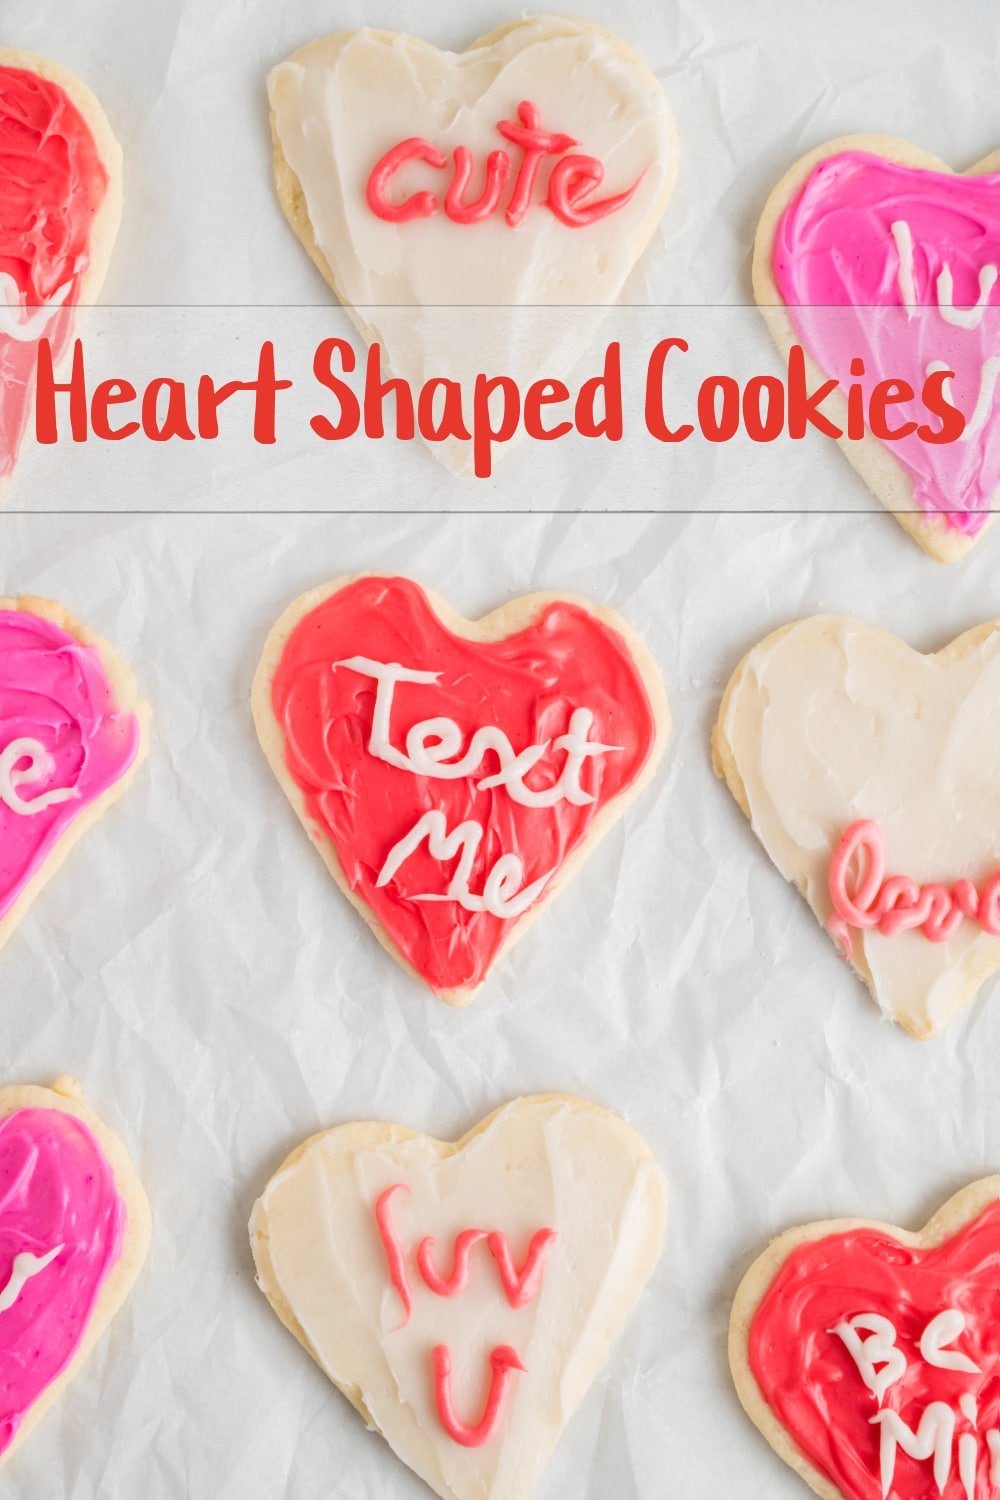 These heart shaped cookies resembling conversation heart candies are a perfect choice for Valentine's Day baking. The sugar cookie dough is simple to make and holds its shape in the oven. The best part - you don't need advanced baking or decorating skills to make these adorable cookies. via @cmpollak1